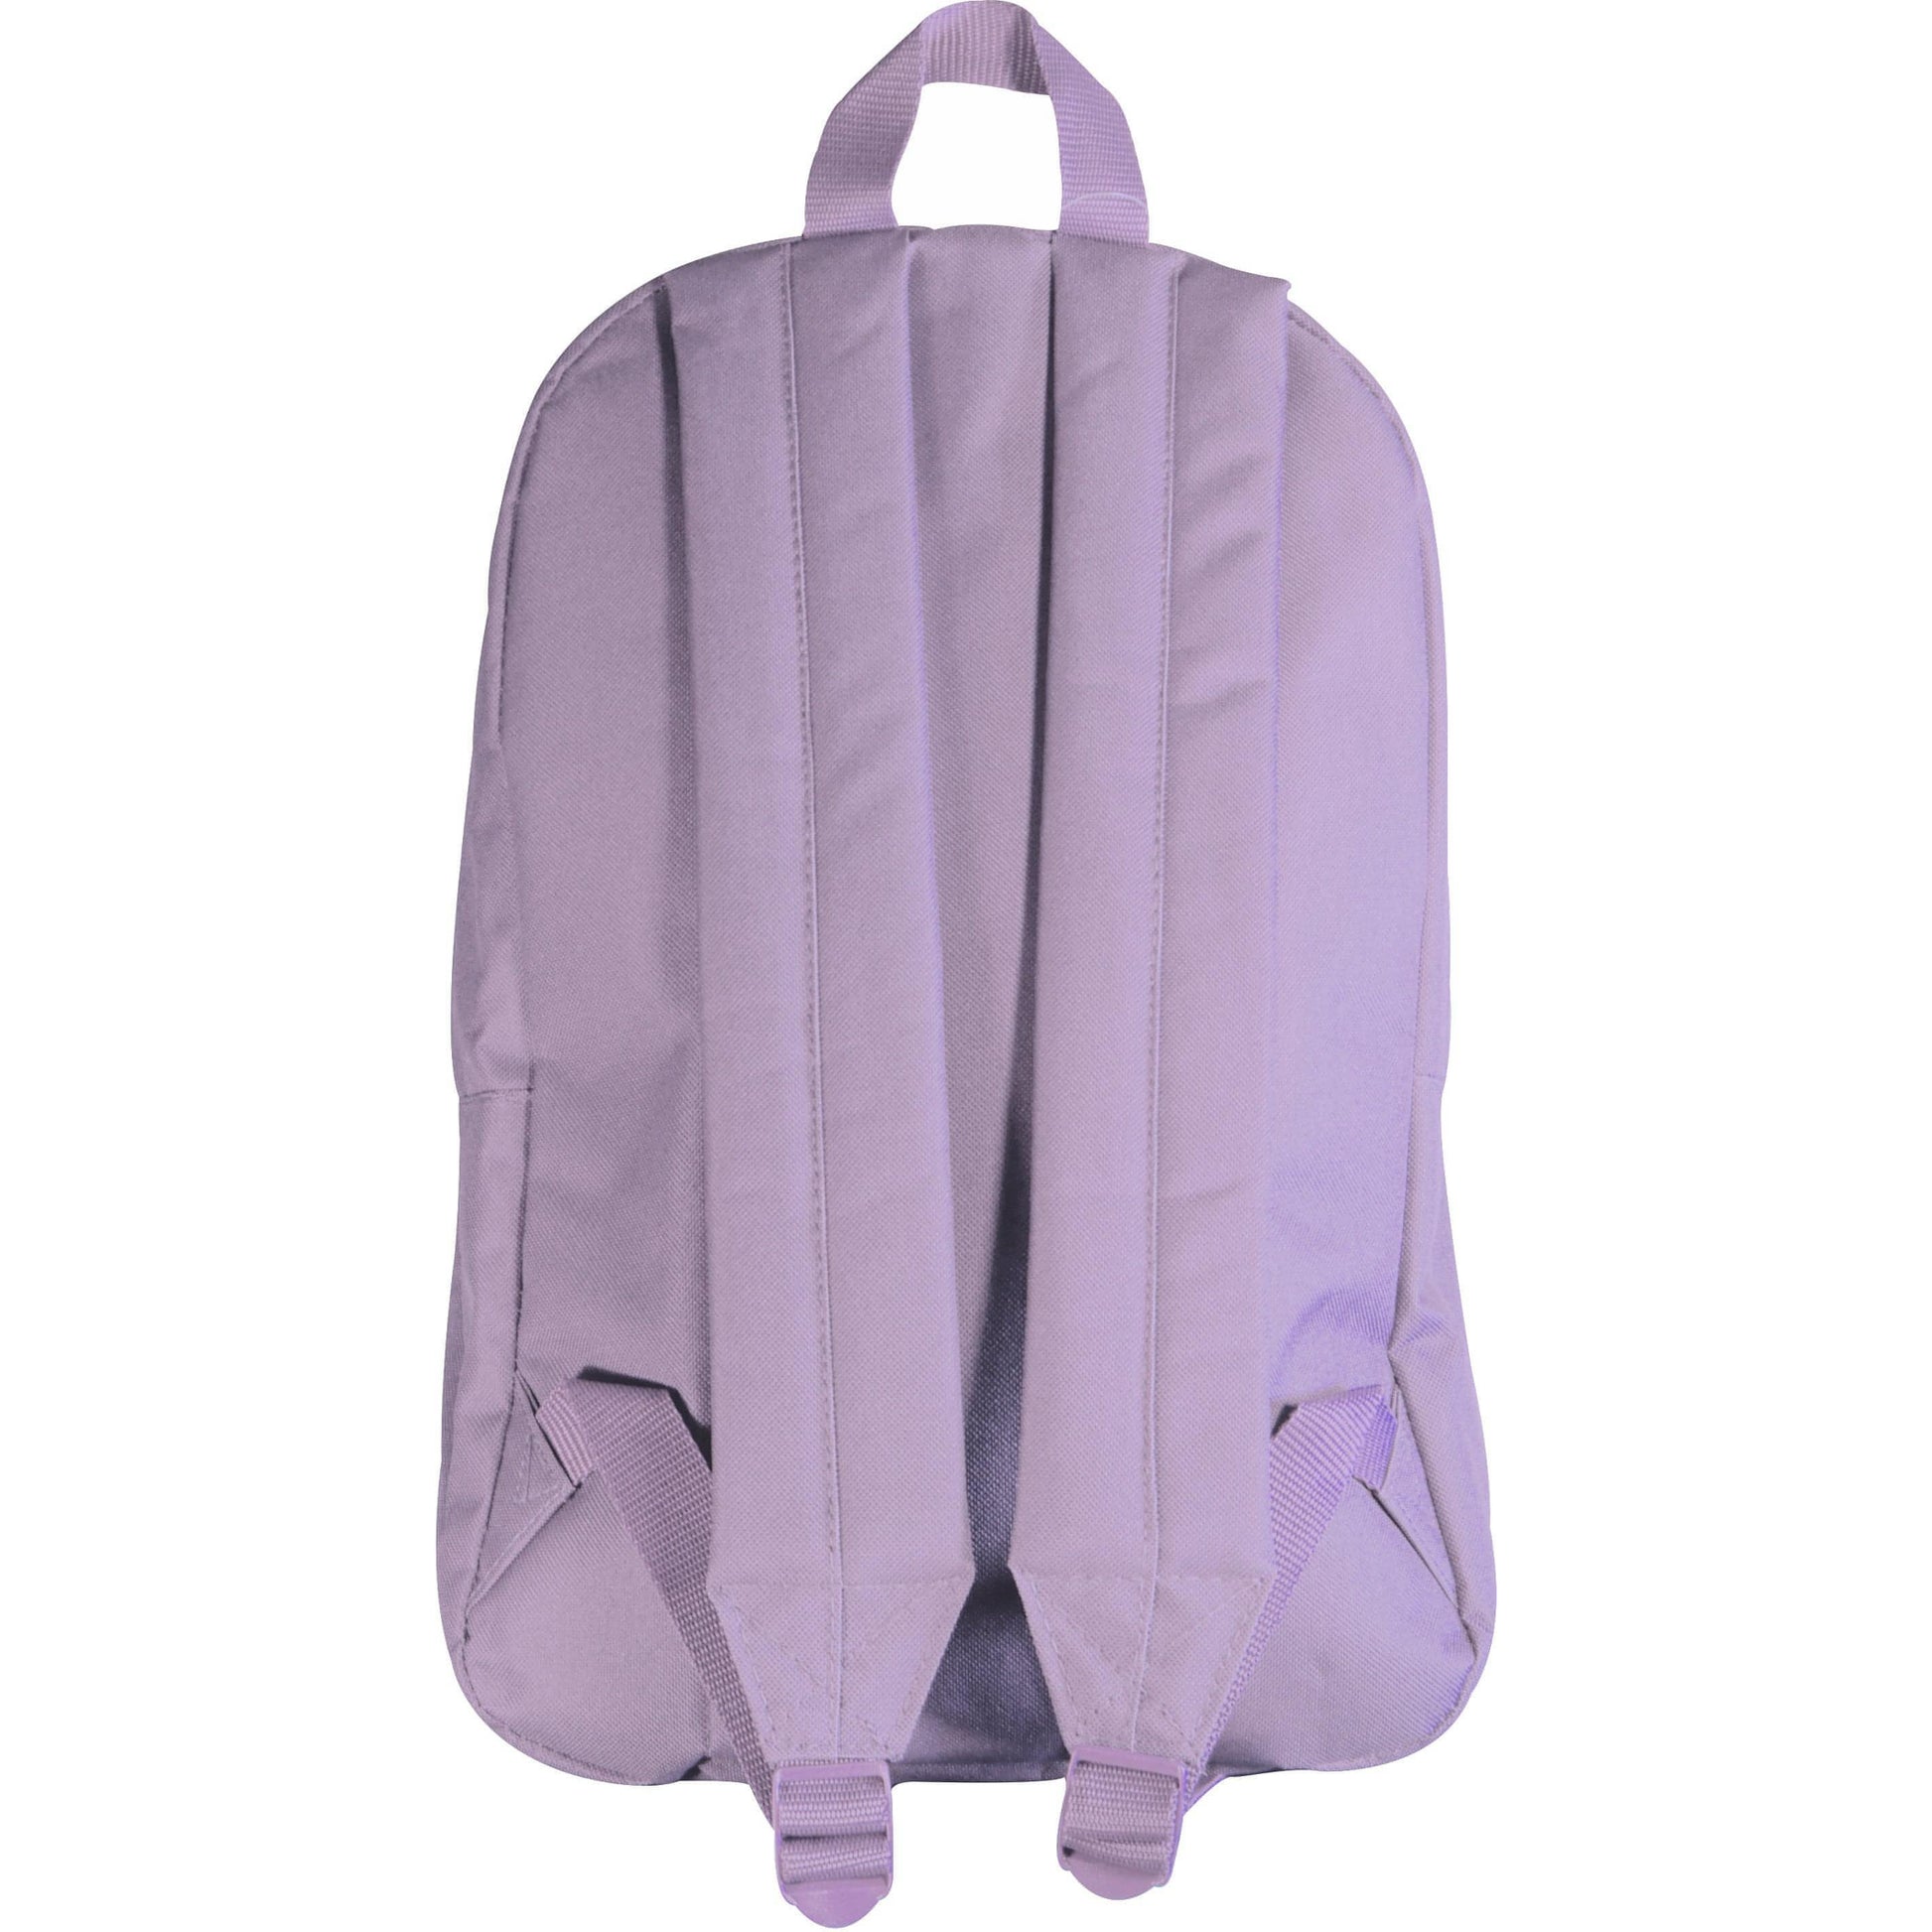 More Mile Cross Avenue Backpack Wm16141 Lilac Back View